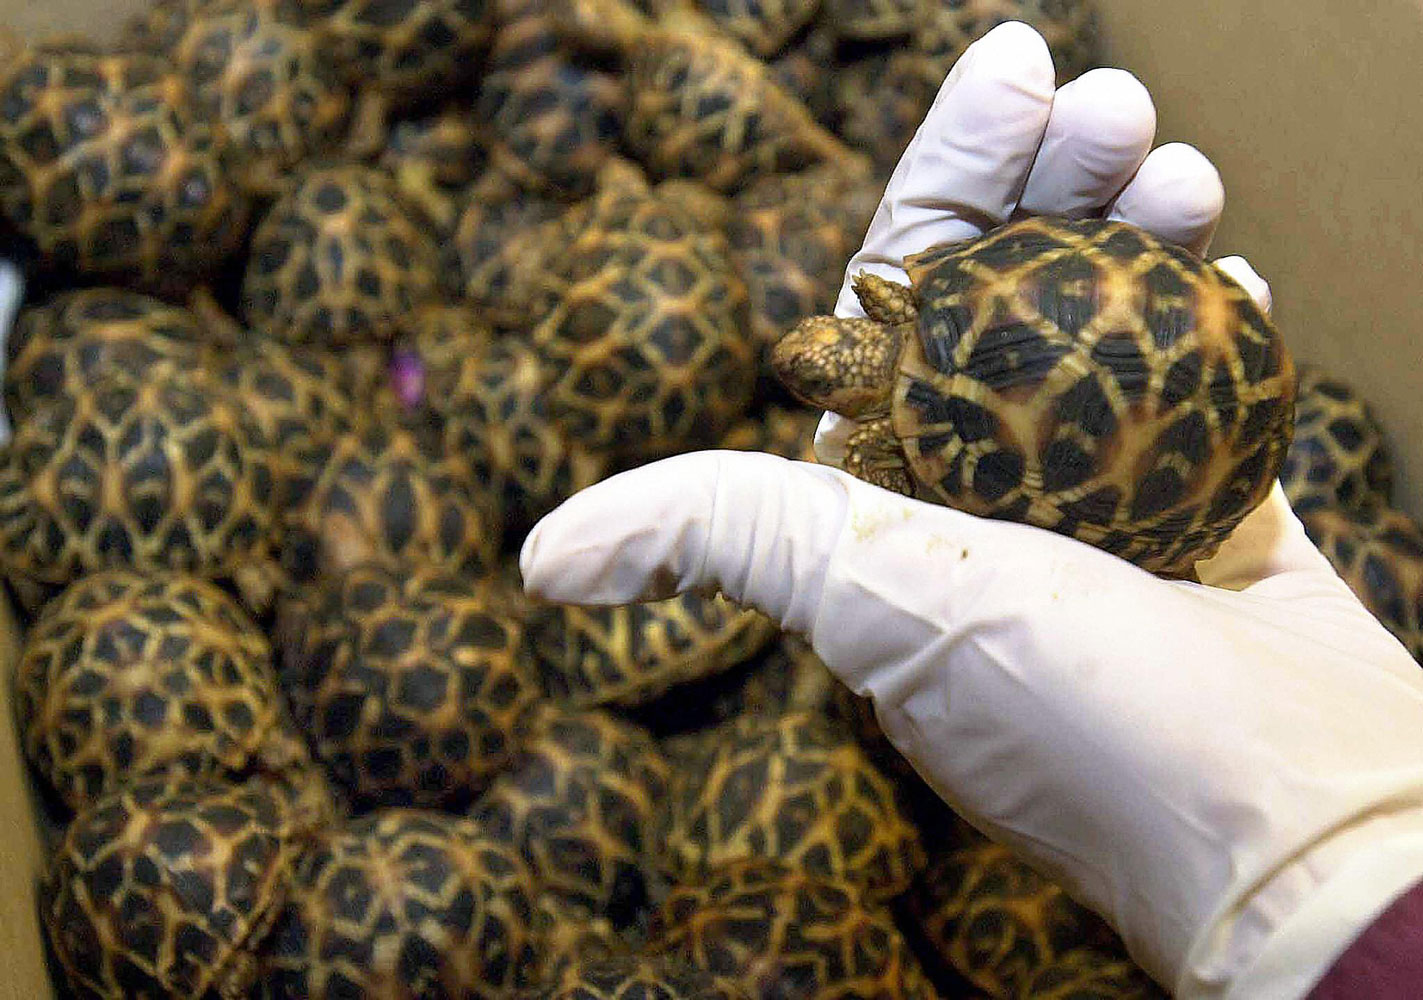 An officer from Singapore's Immigration and Custom Authority  holds one of many star tortoise which were found in the hand luggage of an Indian national at Singapore's Changi Airport on Sept. 15, 2003.  An Indian national was apprehended for illegal possessing 499 endangered star tortoises.